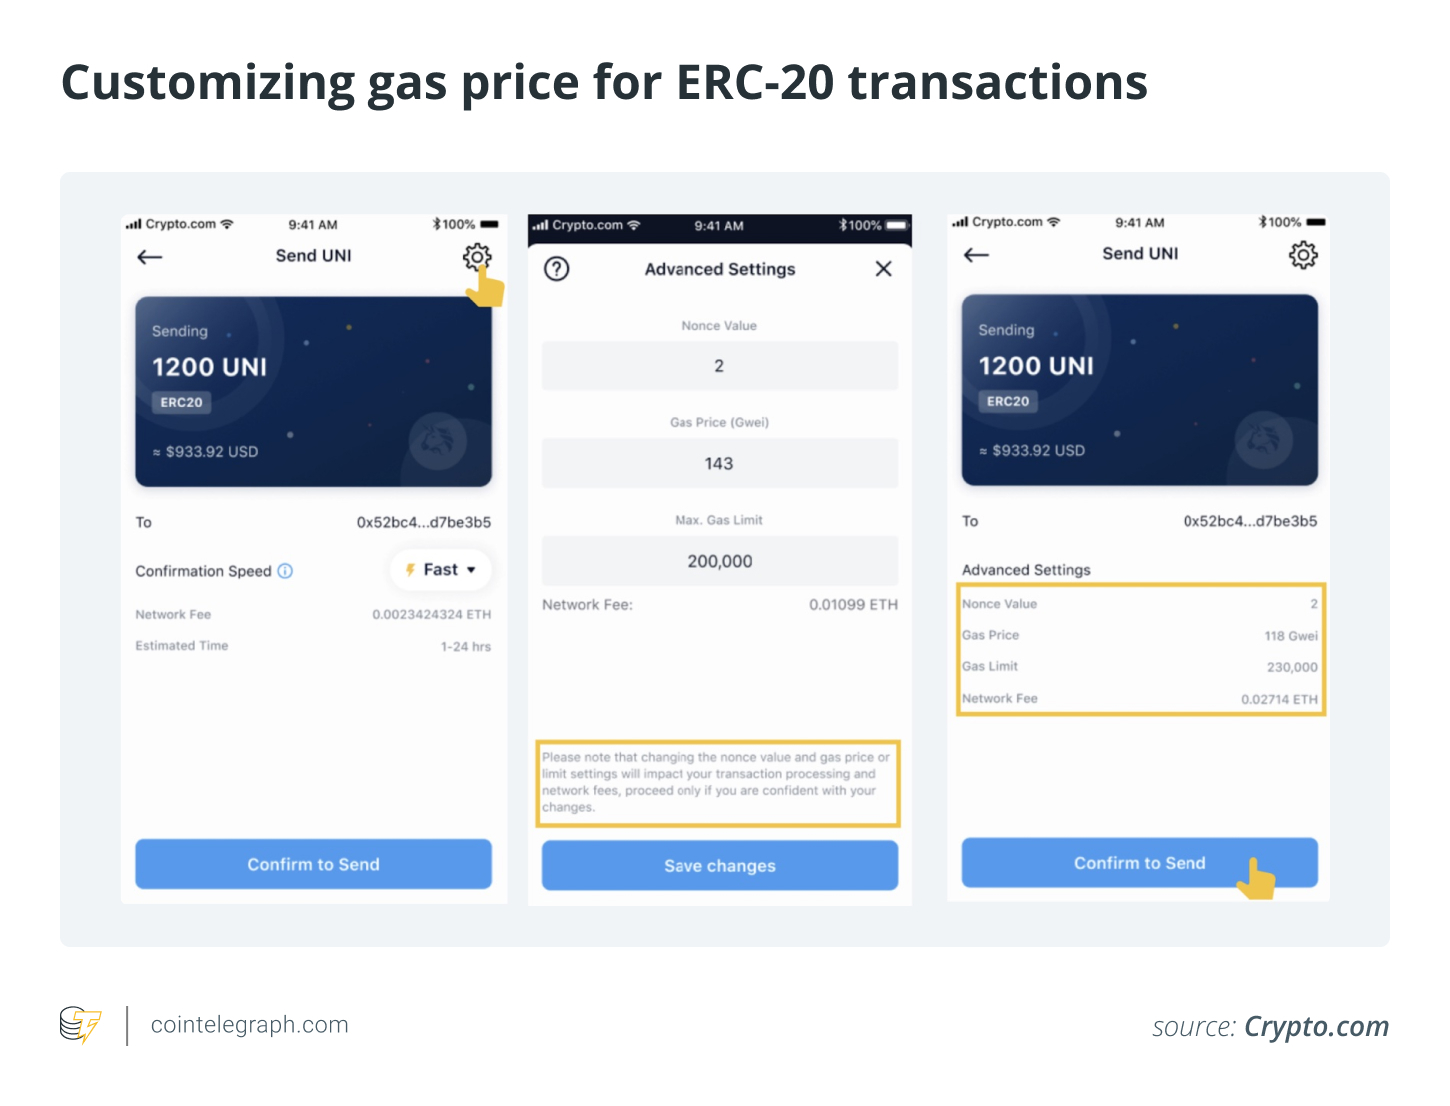 Customizing gas price for ERC-20 transactions on crypto.com